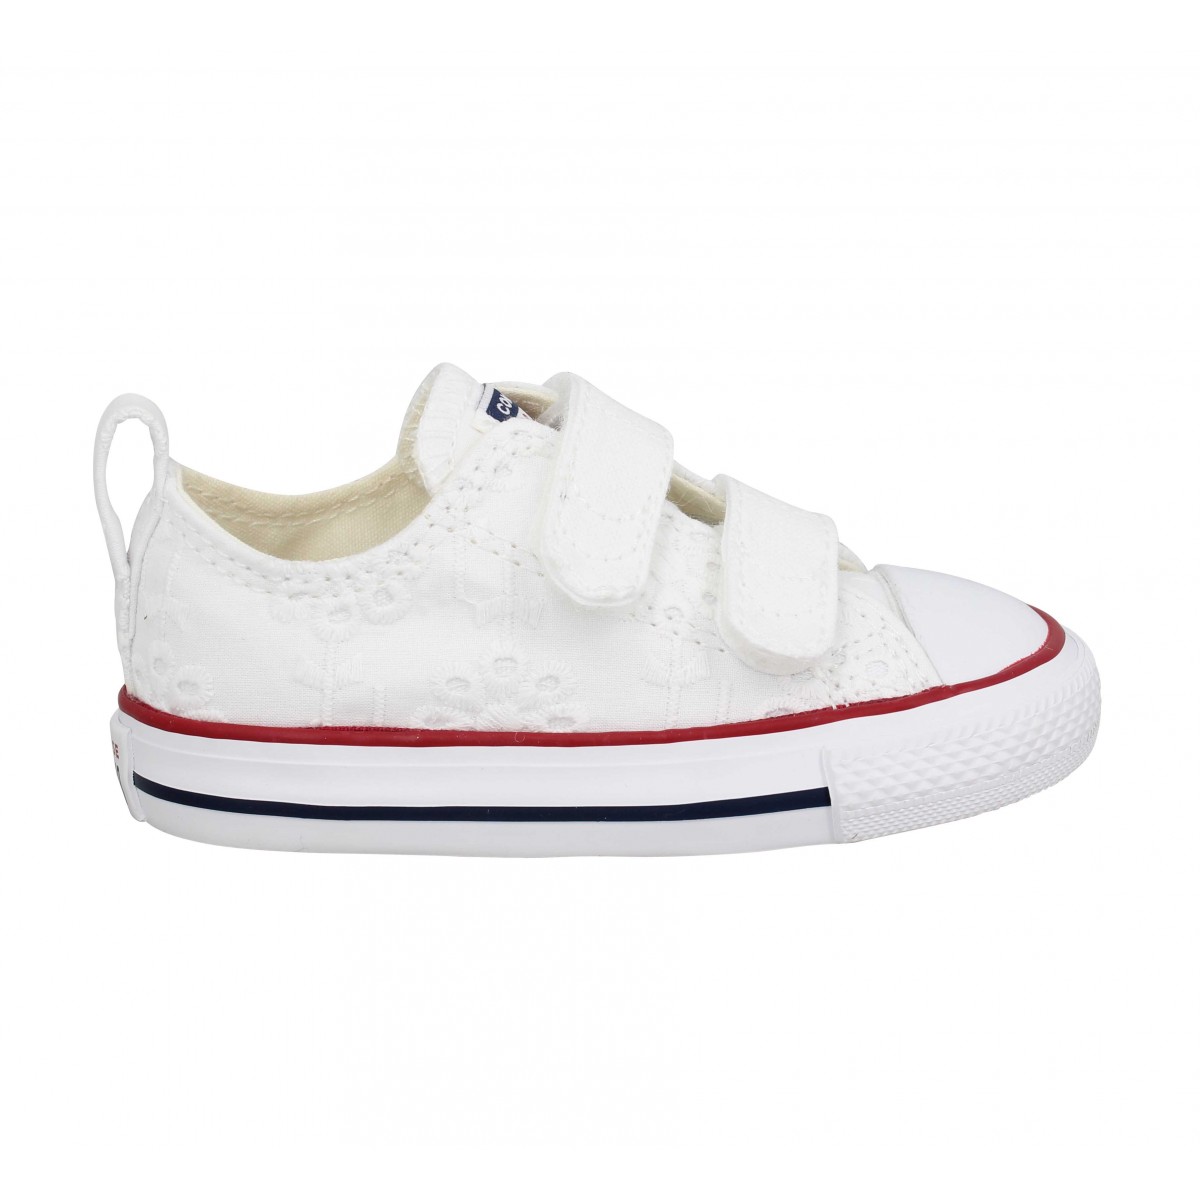 Chaussures Converse chuck taylor all star 2v broderies enfant ...